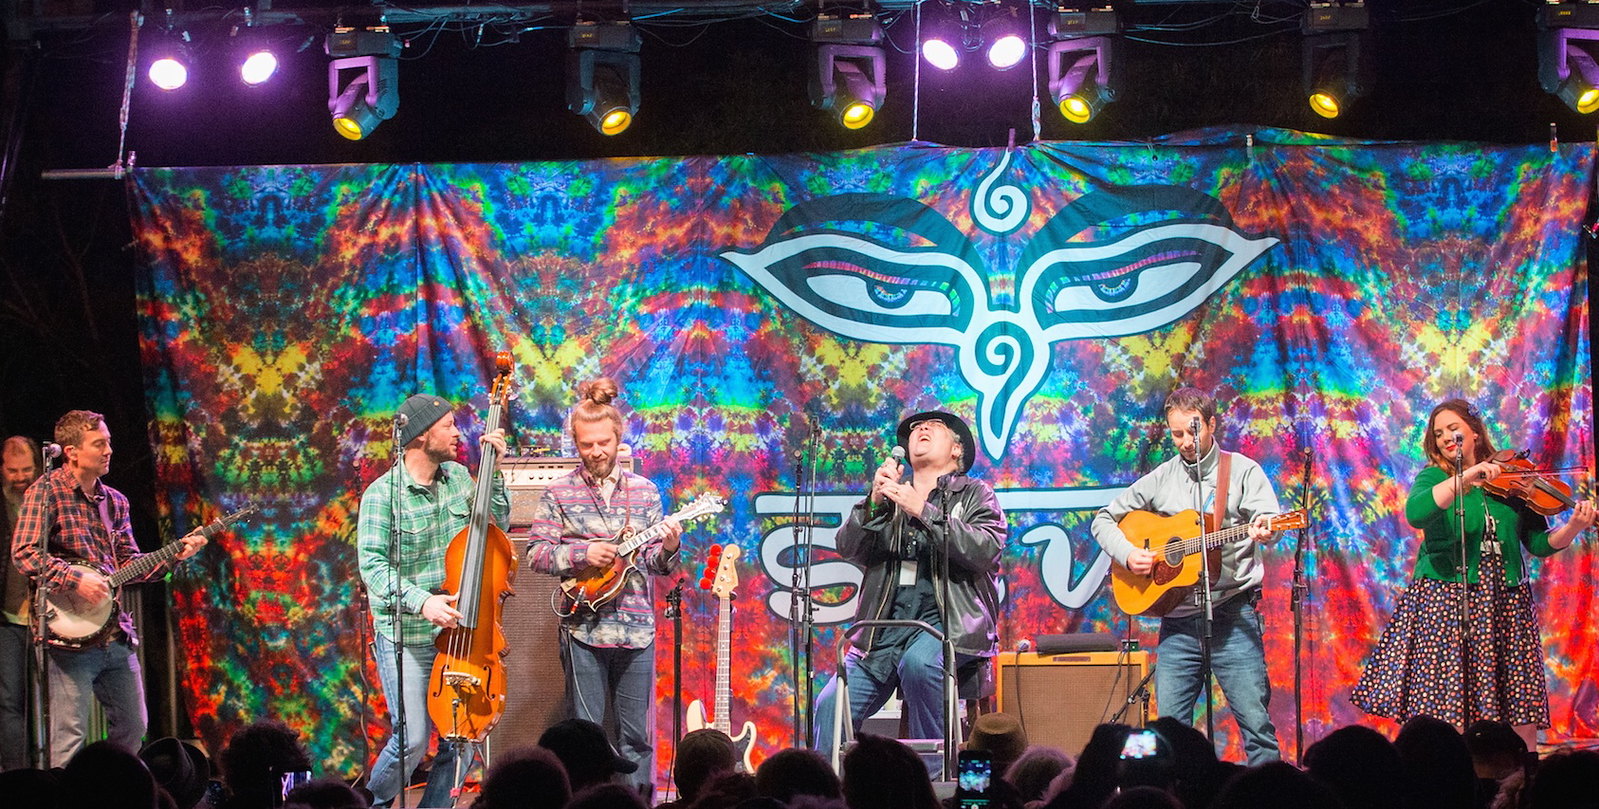 Yonder Mountain String Band with John Popper